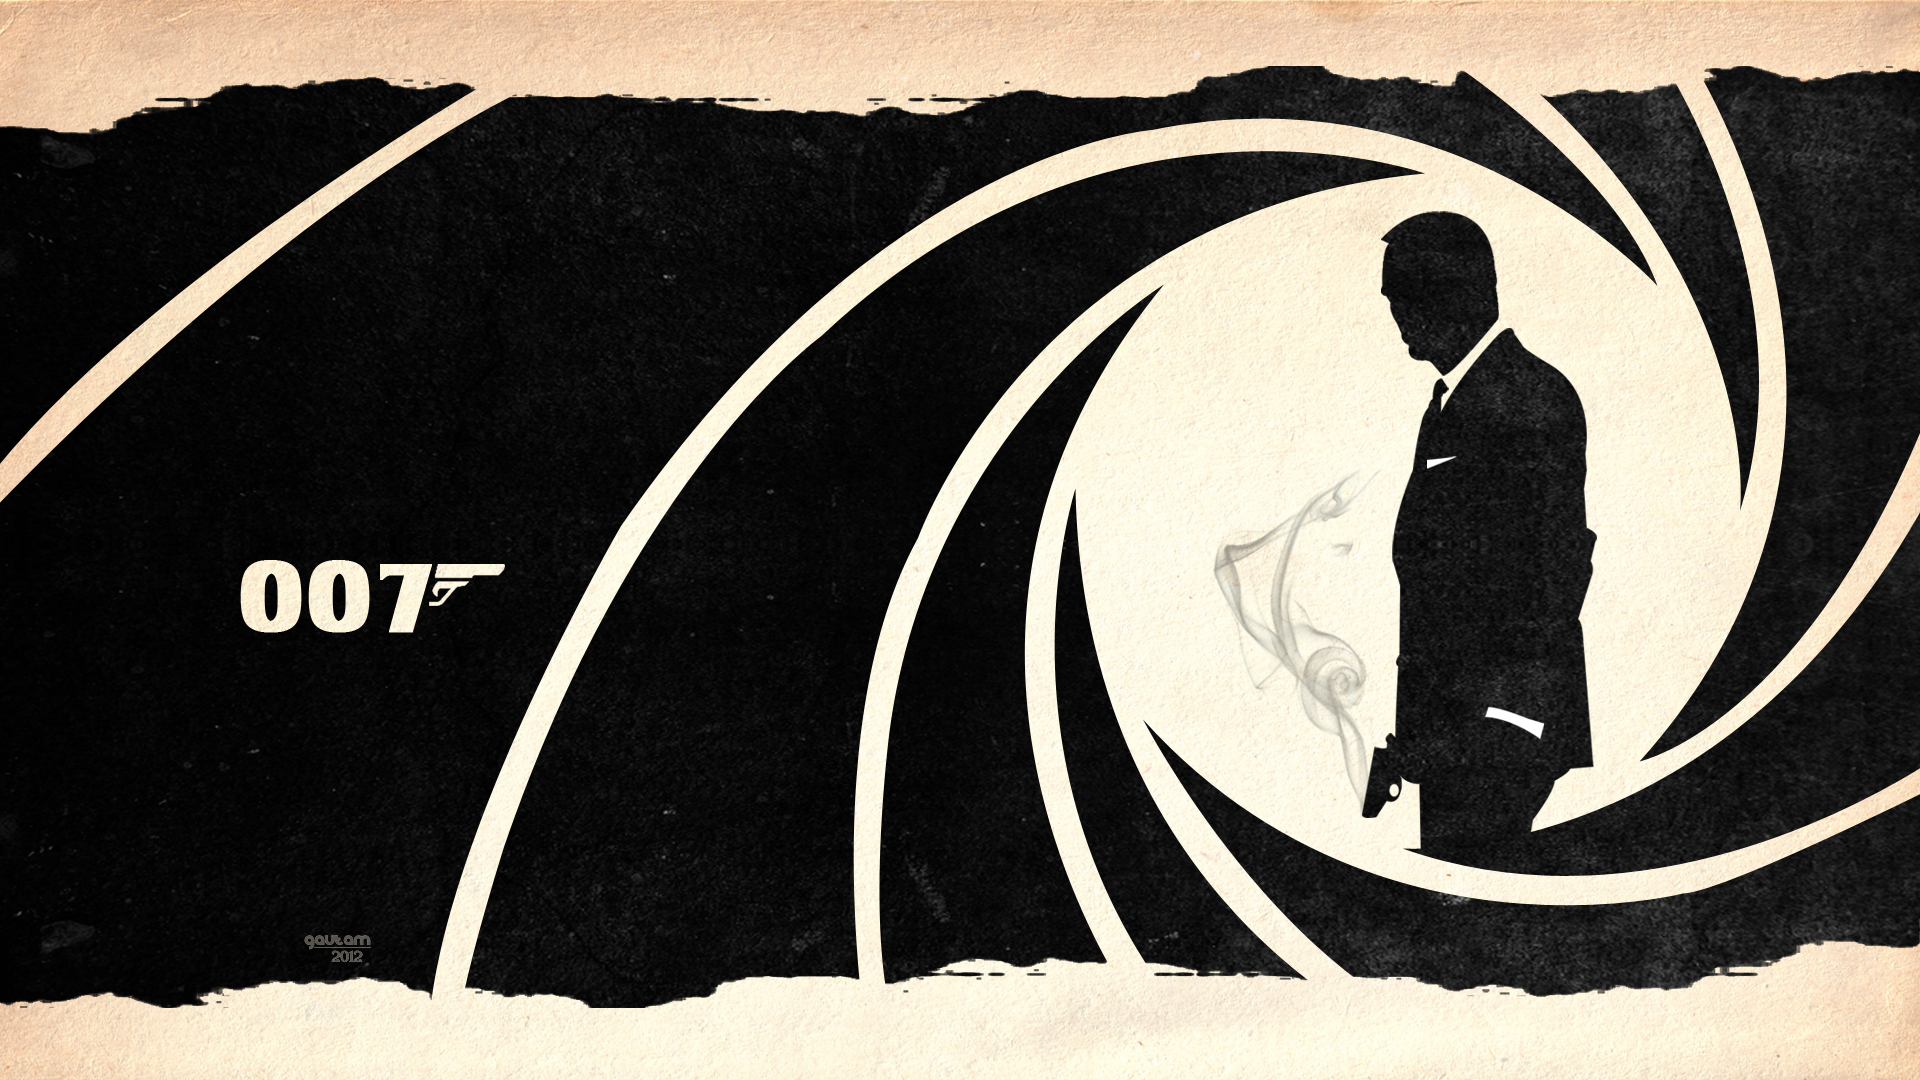 Stamps and Wallpapers on 007-Club - DeviantArt